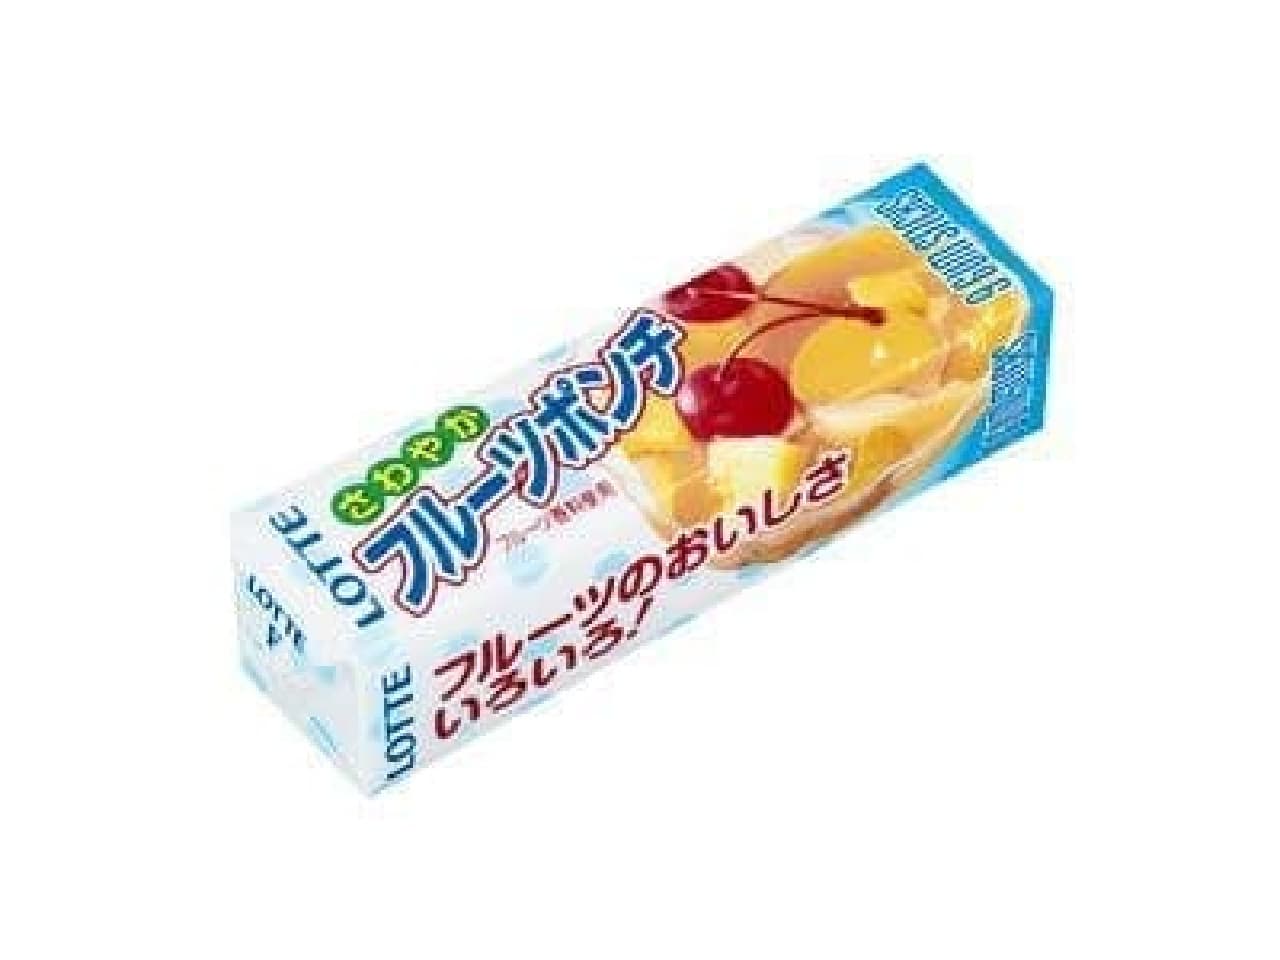 Is the popular lunch menu a chewing gum? Lotte's limited-time product "Fruit Punch" gum